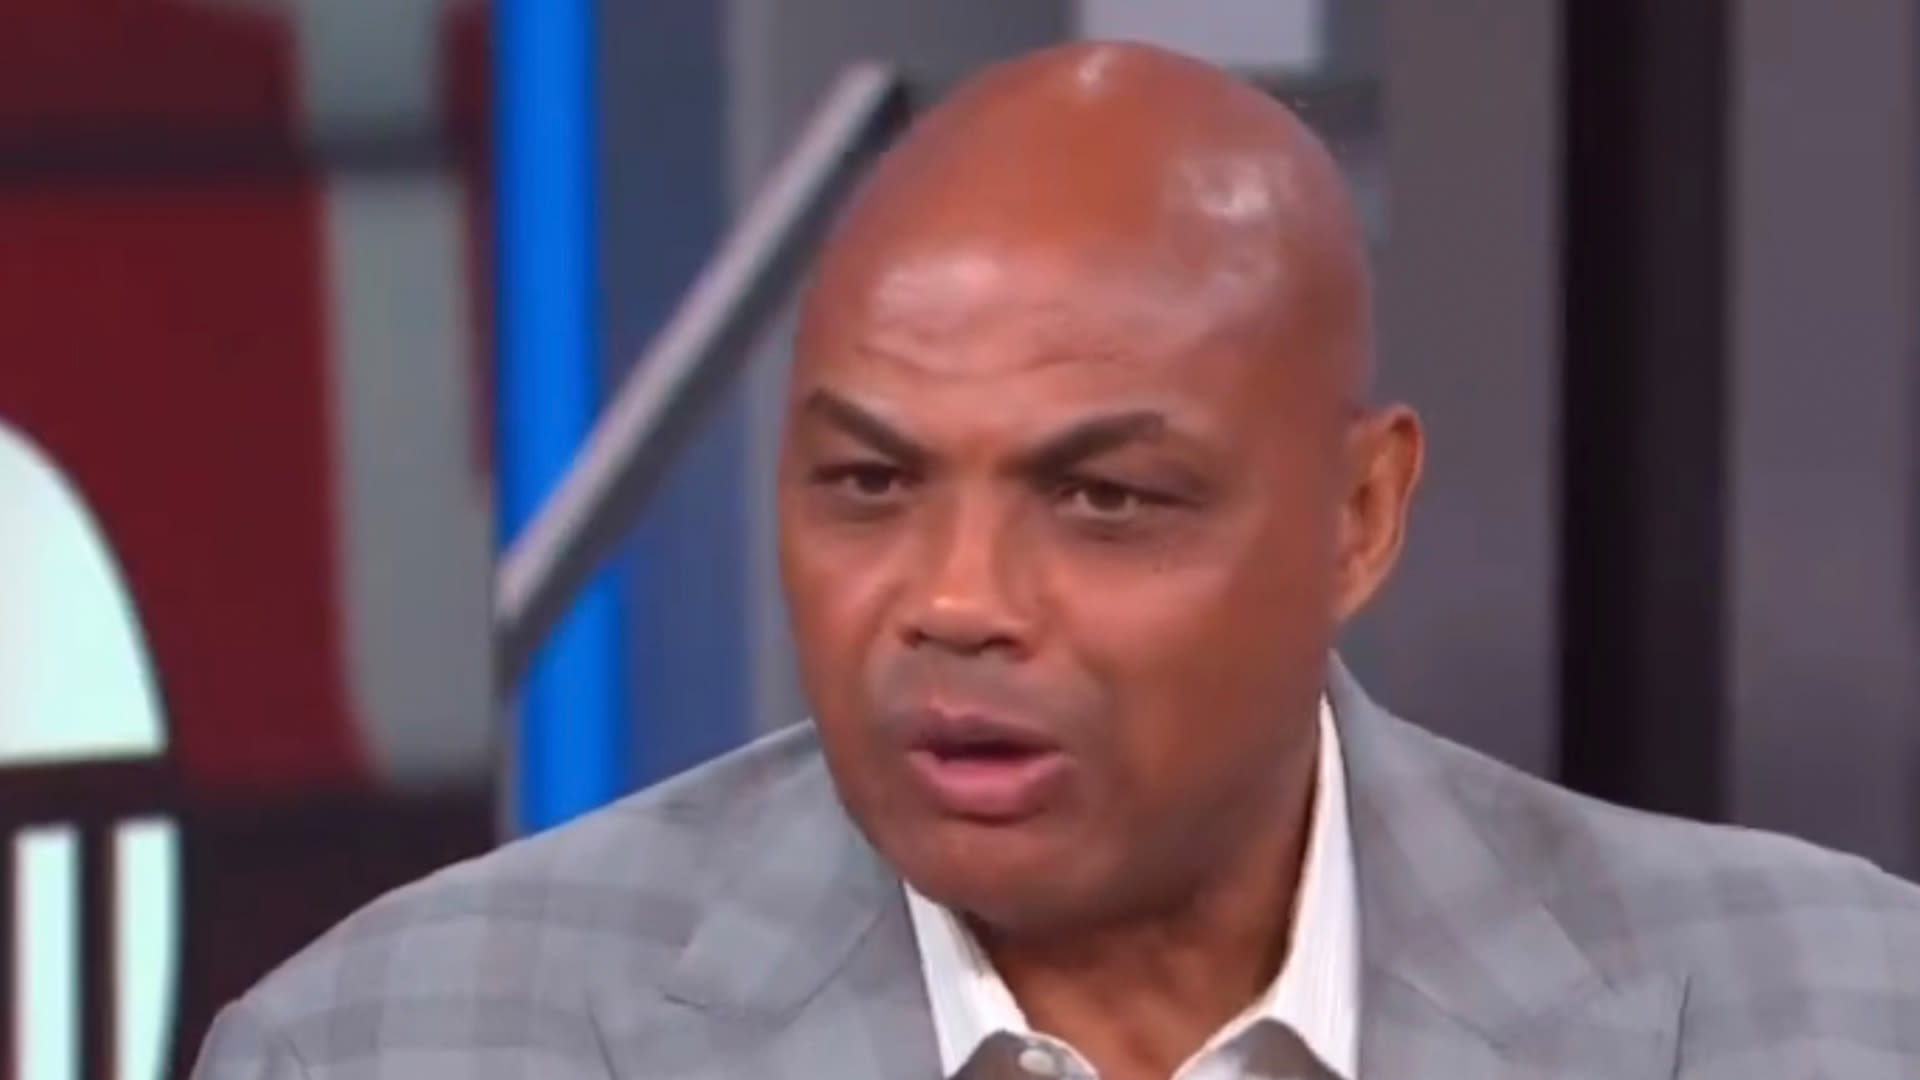 Charles Barkley perplexed by little-known NBA rule that 'doesn't make sense'